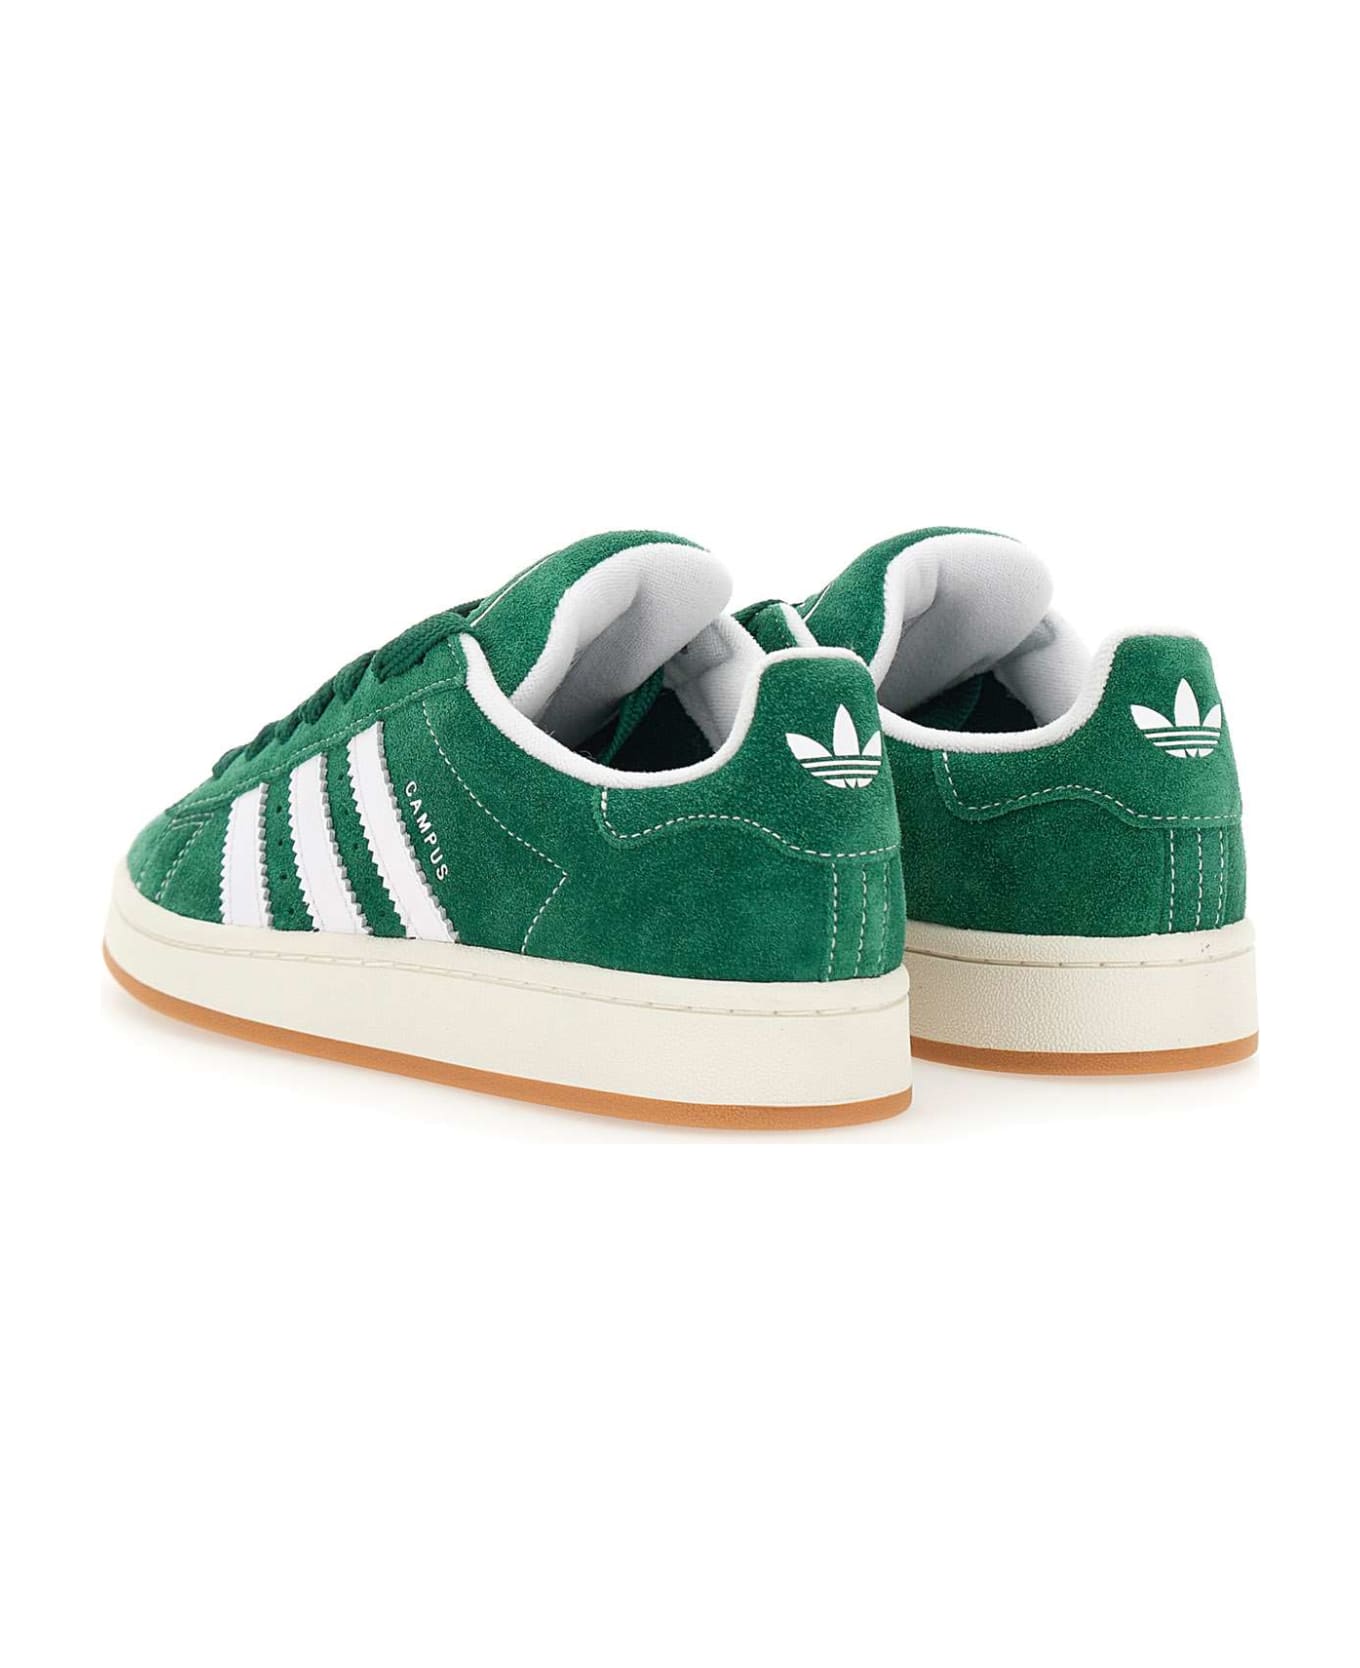 Adidas Campus 00s Sneakers - Drkgrn Ftwwht Owhite その他各種シューズ